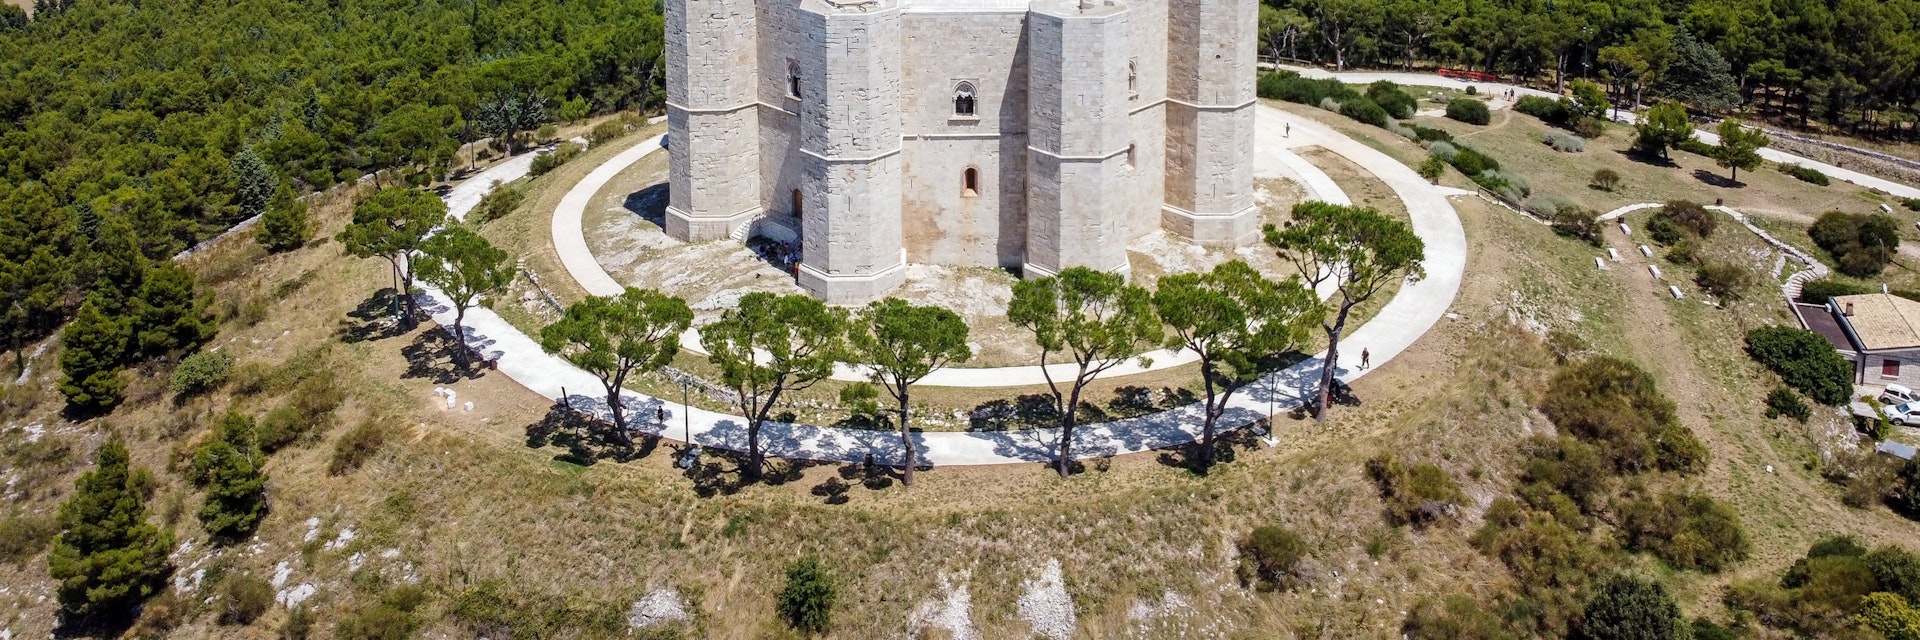 Aerial view of the Castel del Monte in Southern Italy - Octogonal shaped castle built by the Holy Roman Emperor Frederick II in the 13th century in Apulia; Shutterstock ID 1801891420; your: Bridget Brown; gl: 65050; netsuite: Online Editorial; full: POI Image Update